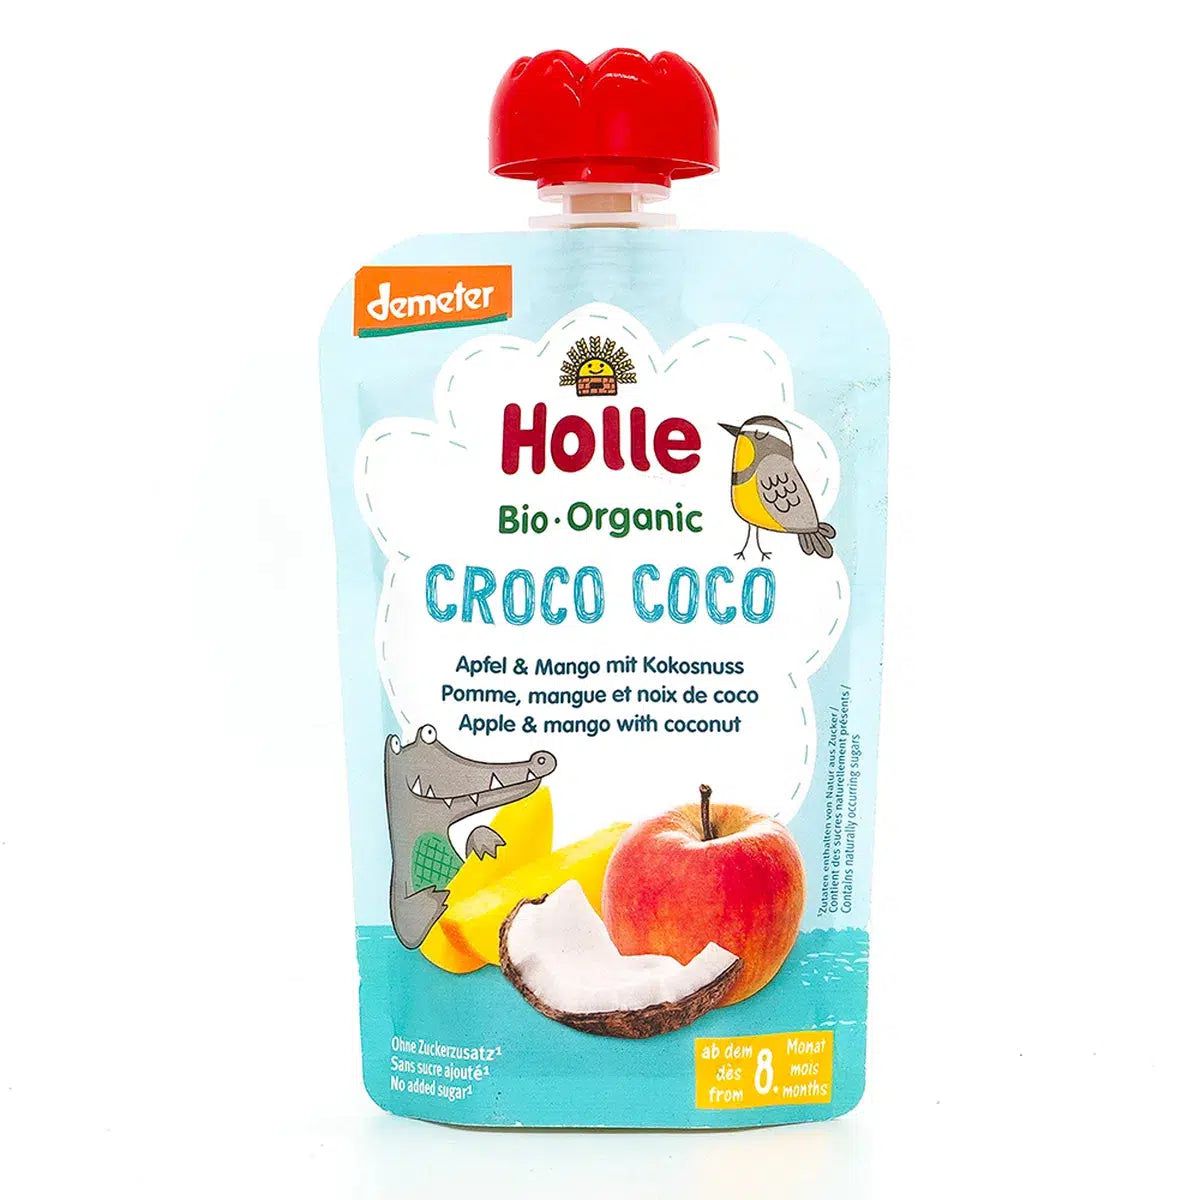 Holle Croco Coco: Apple & Mango with Coconut (8+ Months) - 12 Pouches